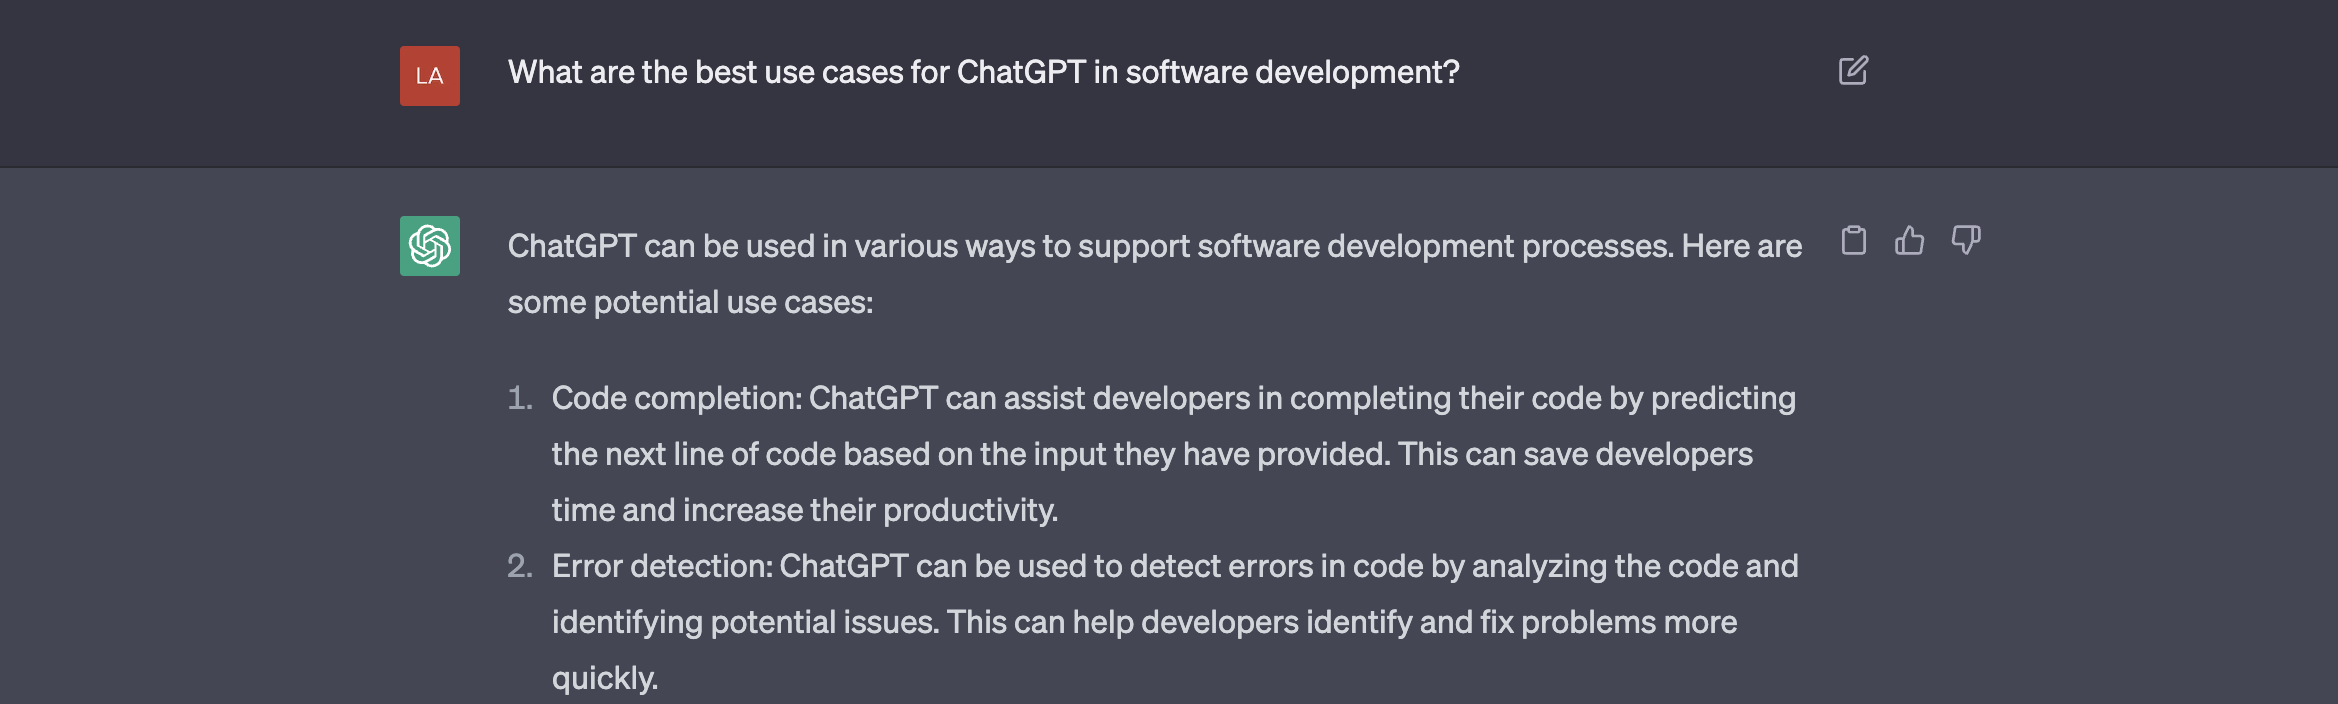 ChatGPT Use Cases for Software Development